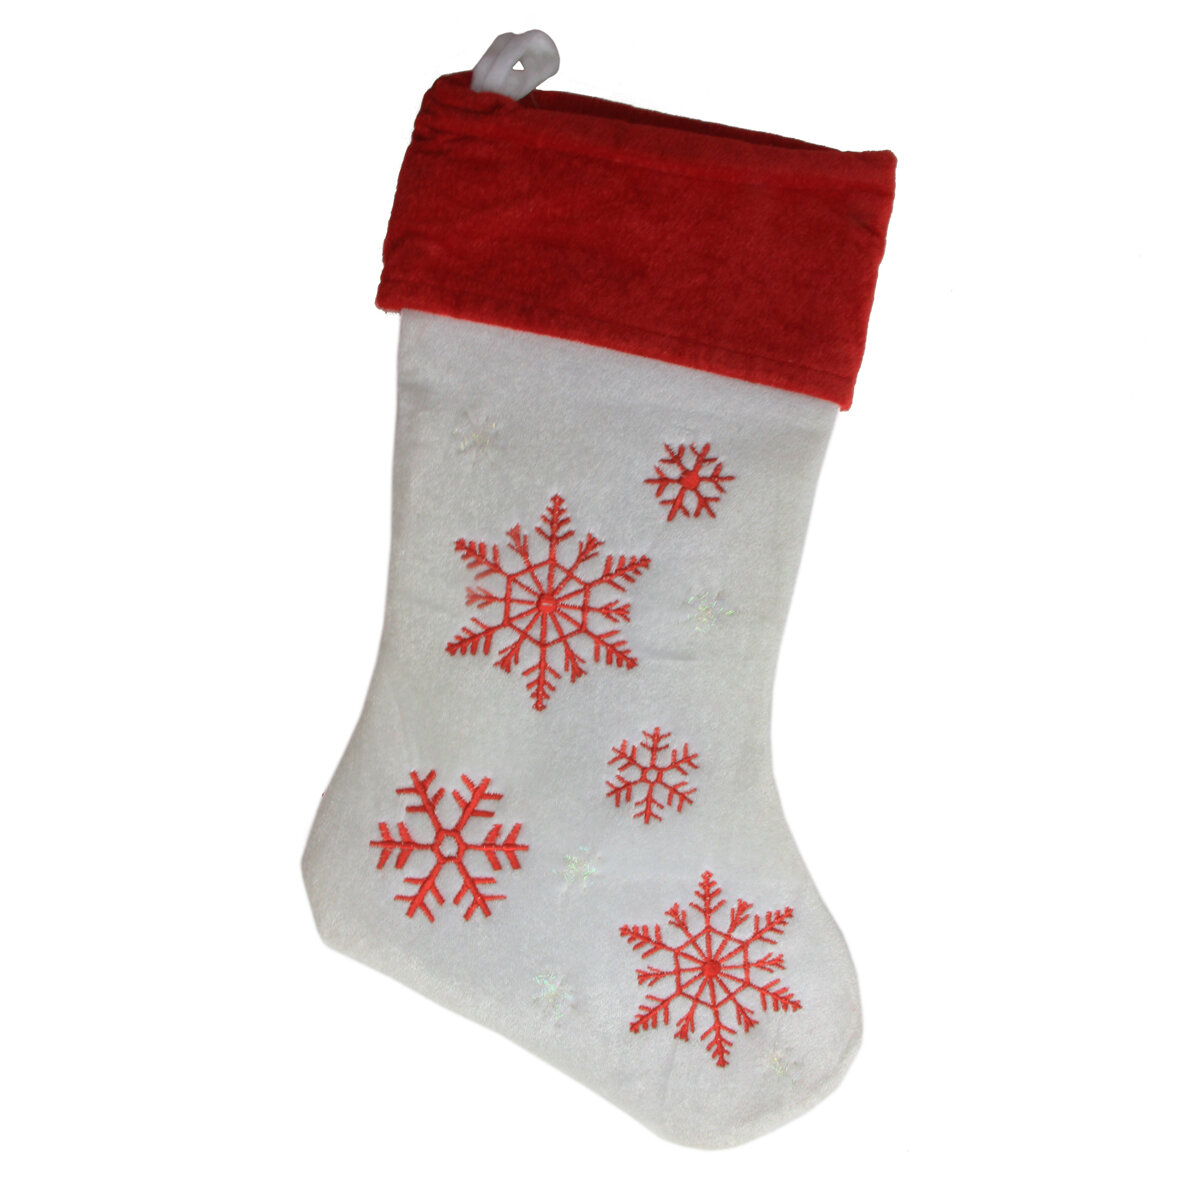 Northlight 19 White and Silver Snowflakes Christmas Stocking